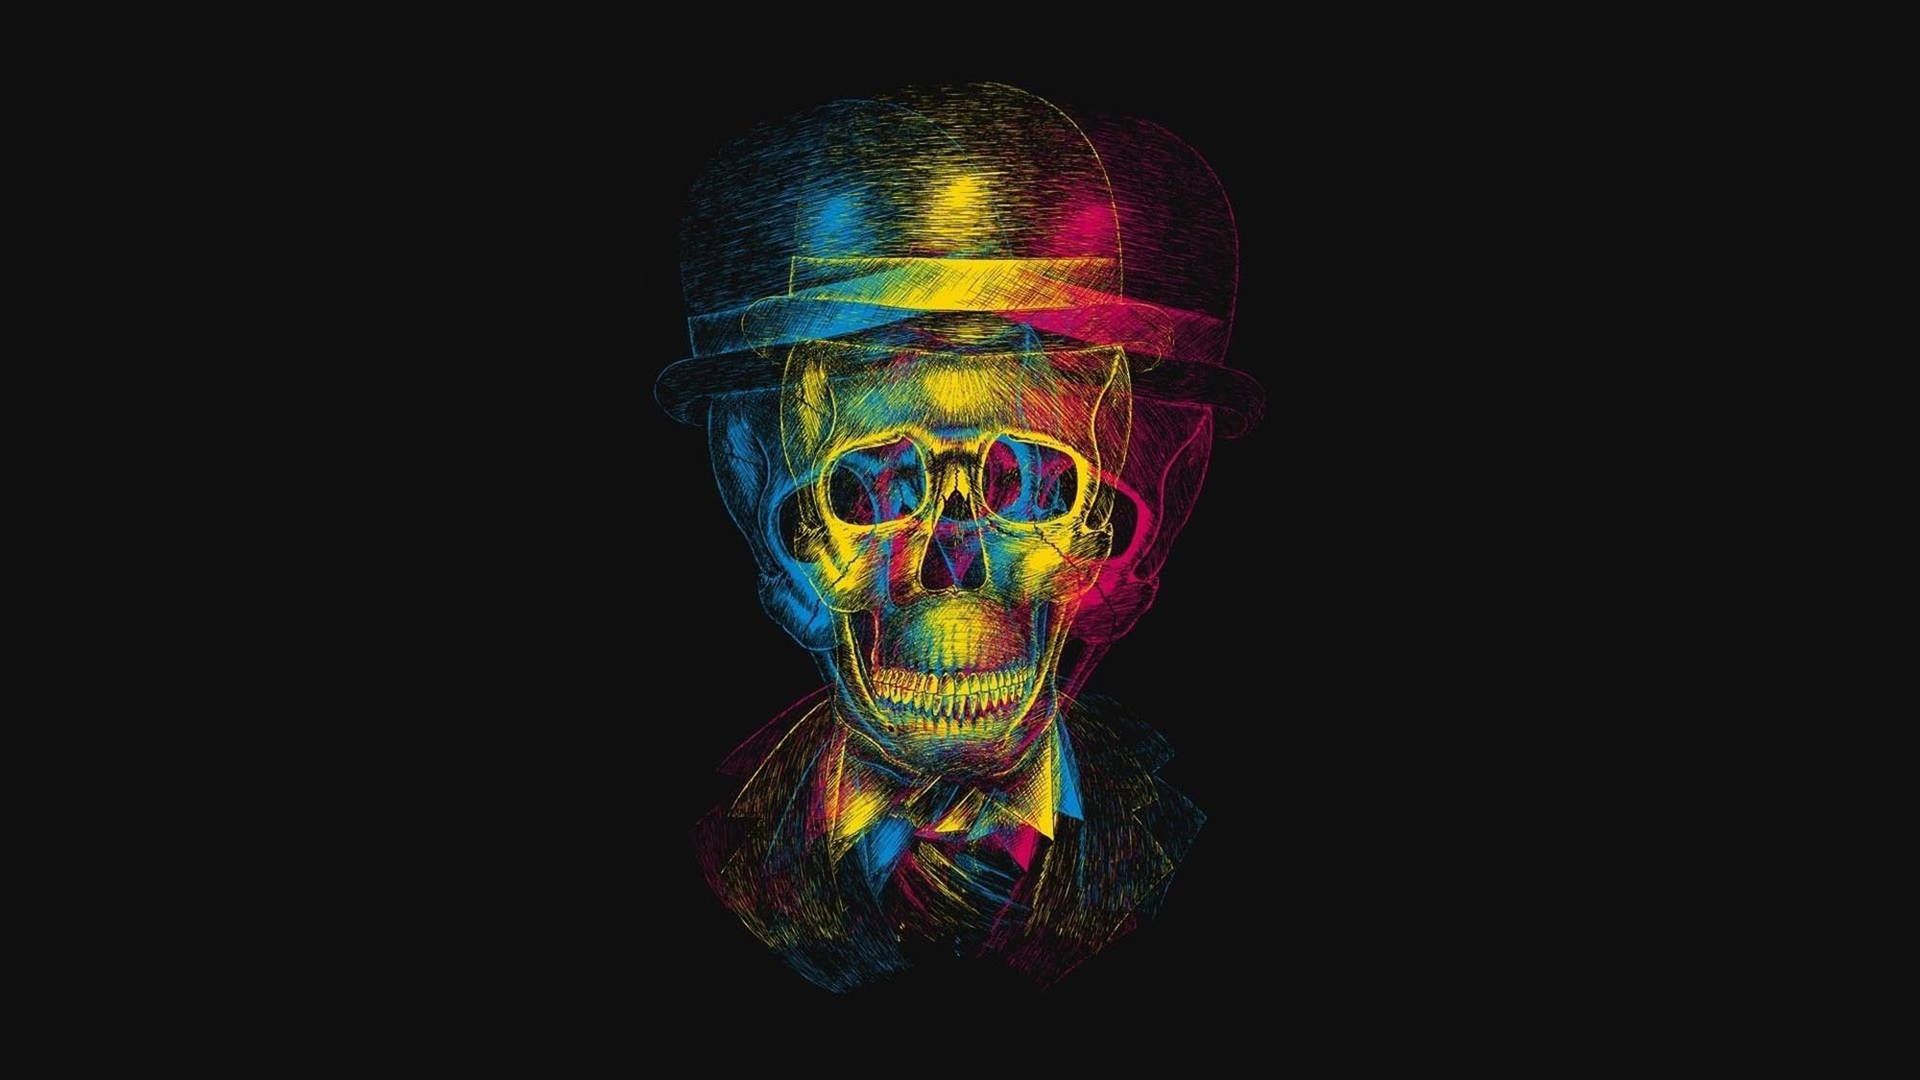 A skull wearing a hat and glasses - Trippy, dark